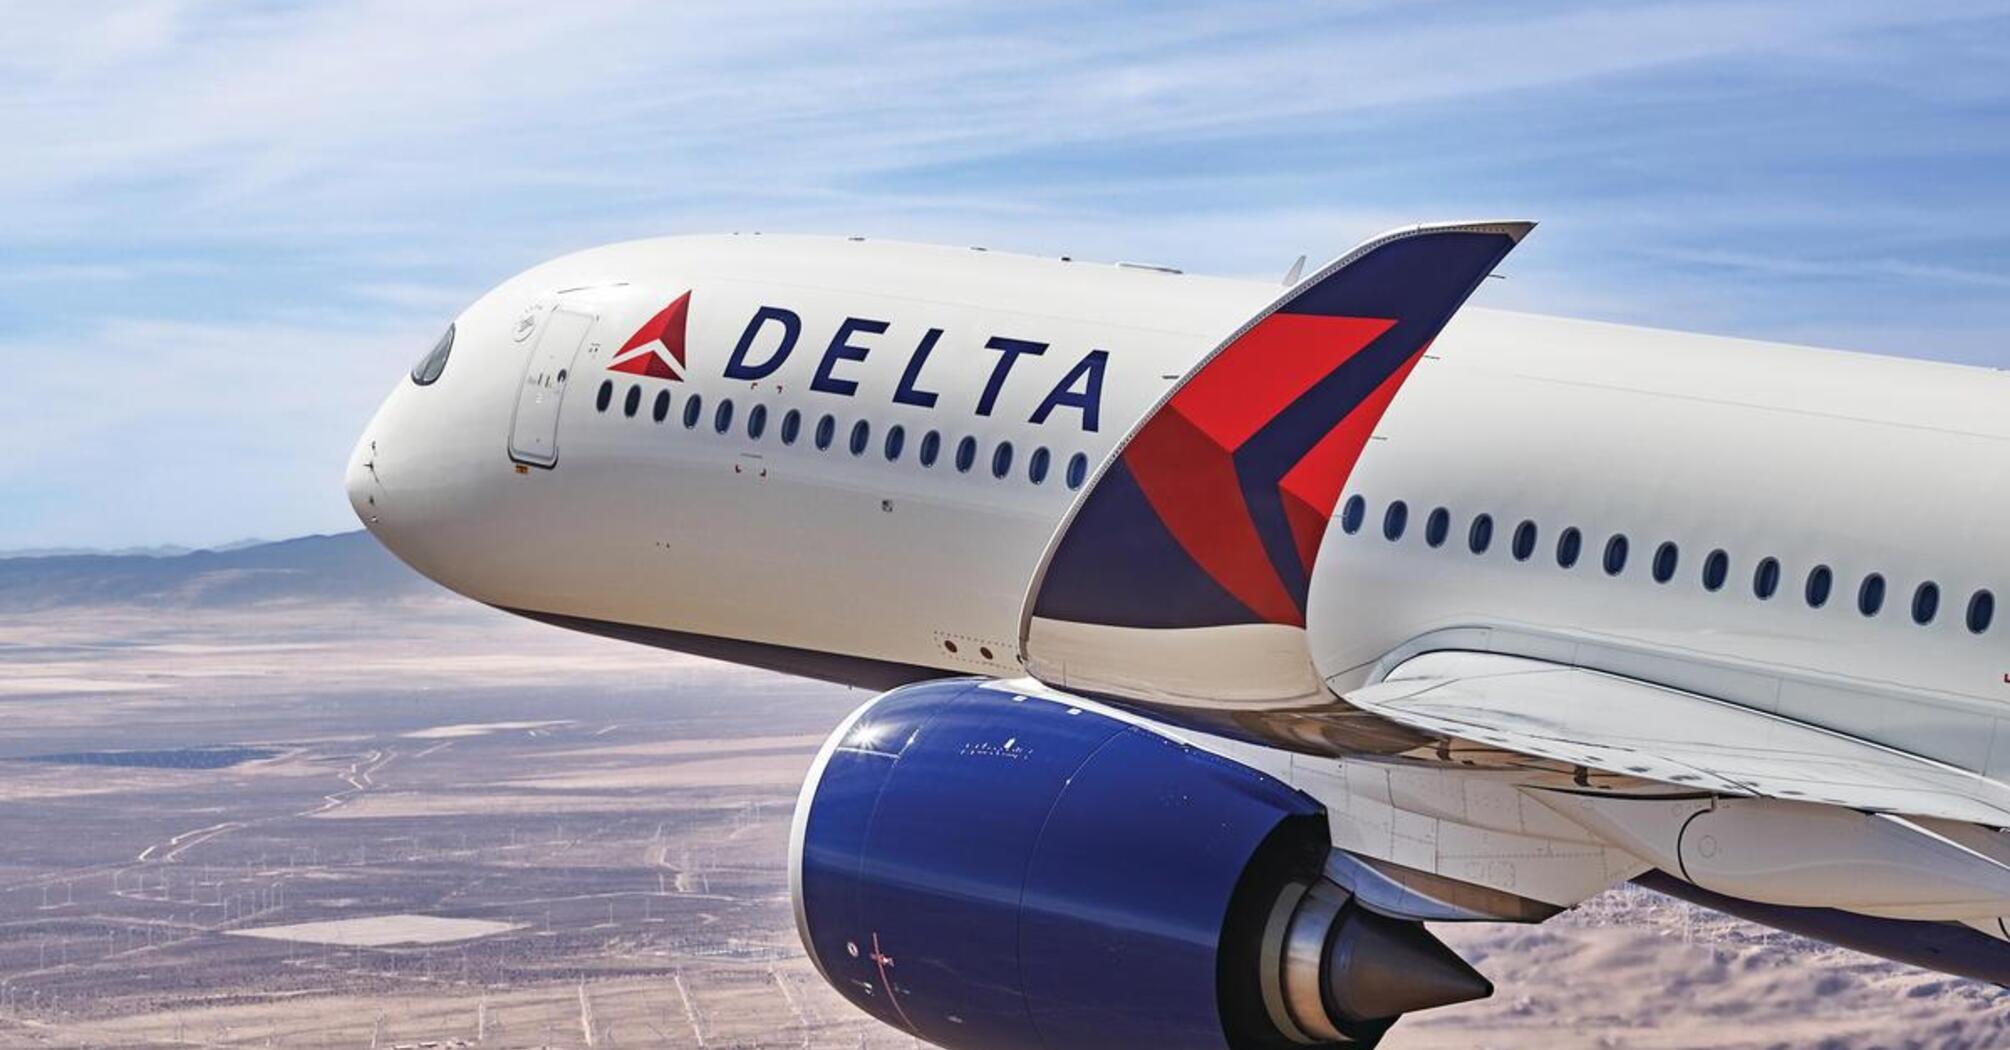 The Delta Air Lines airplane